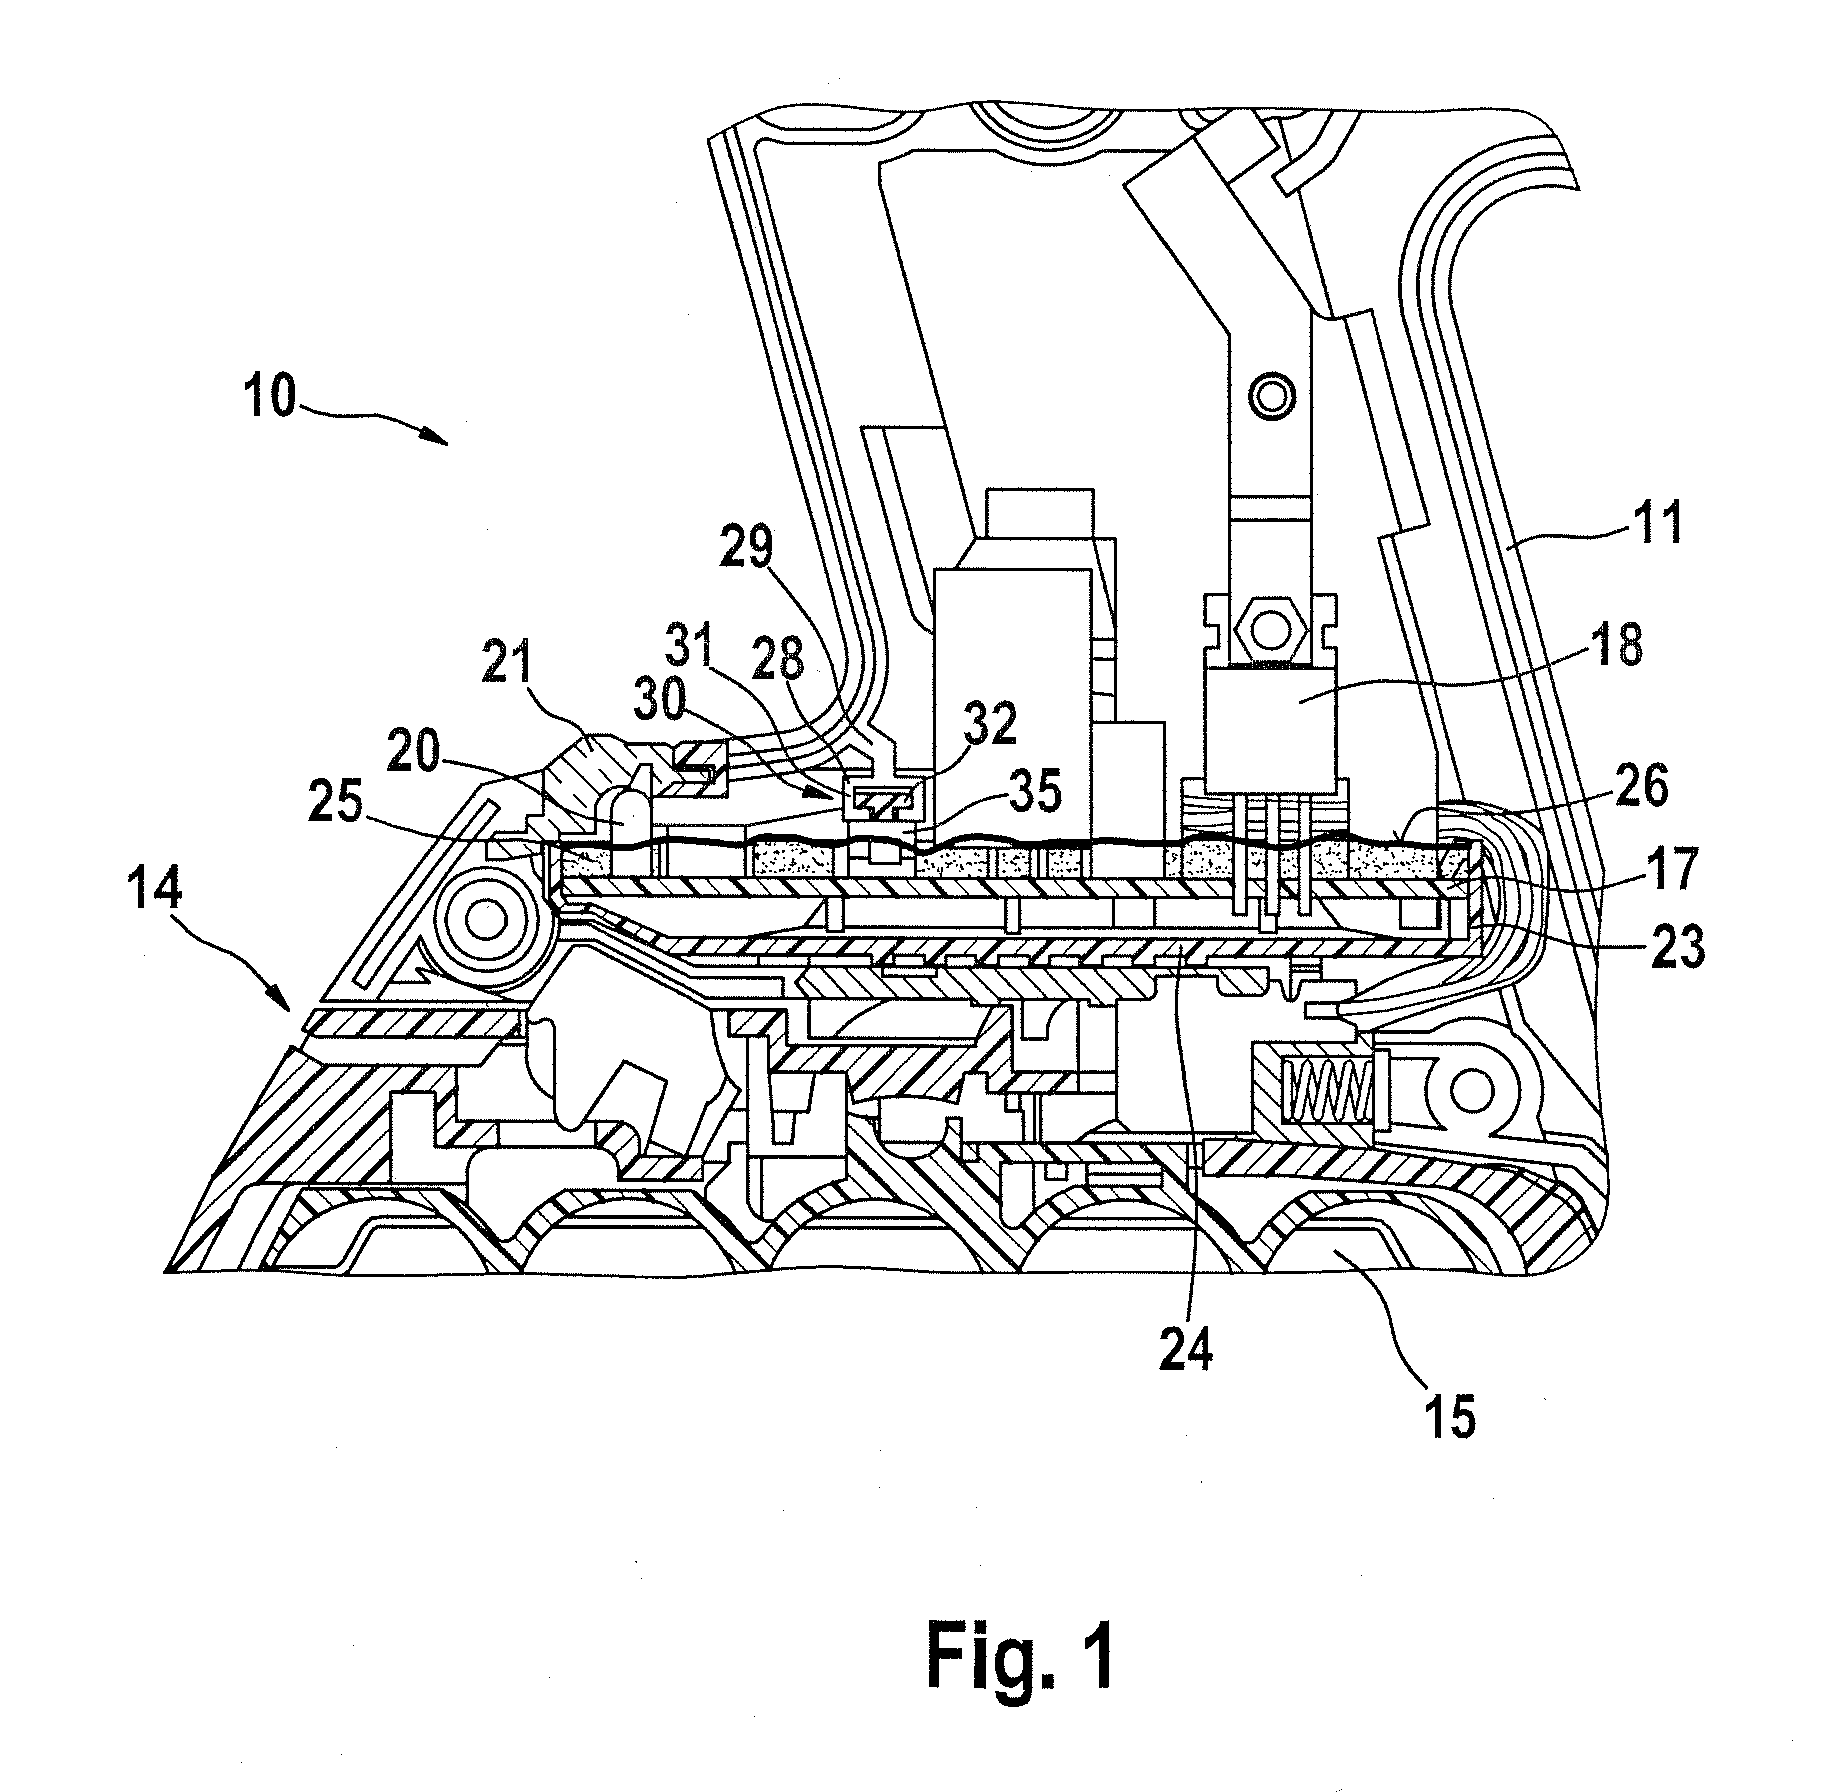 Electrical appliance, in particular hand-held power tool